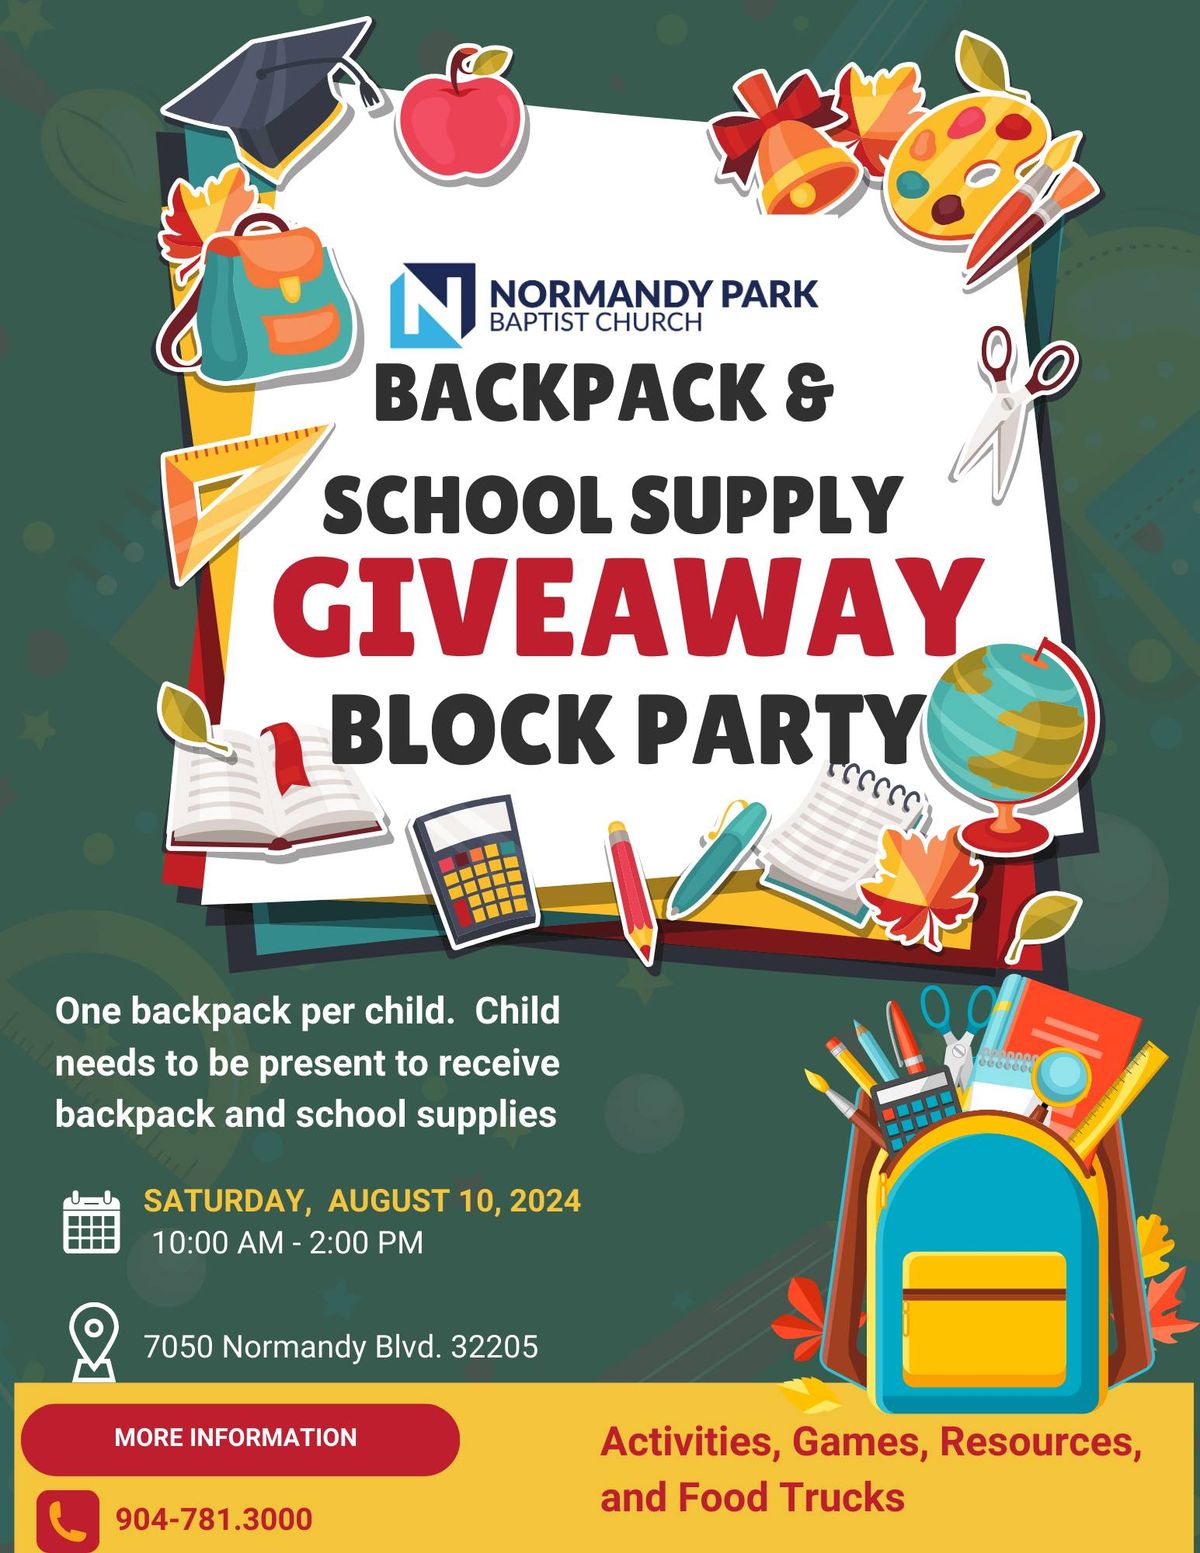 Backpack and School Supply Giveaway Block Party